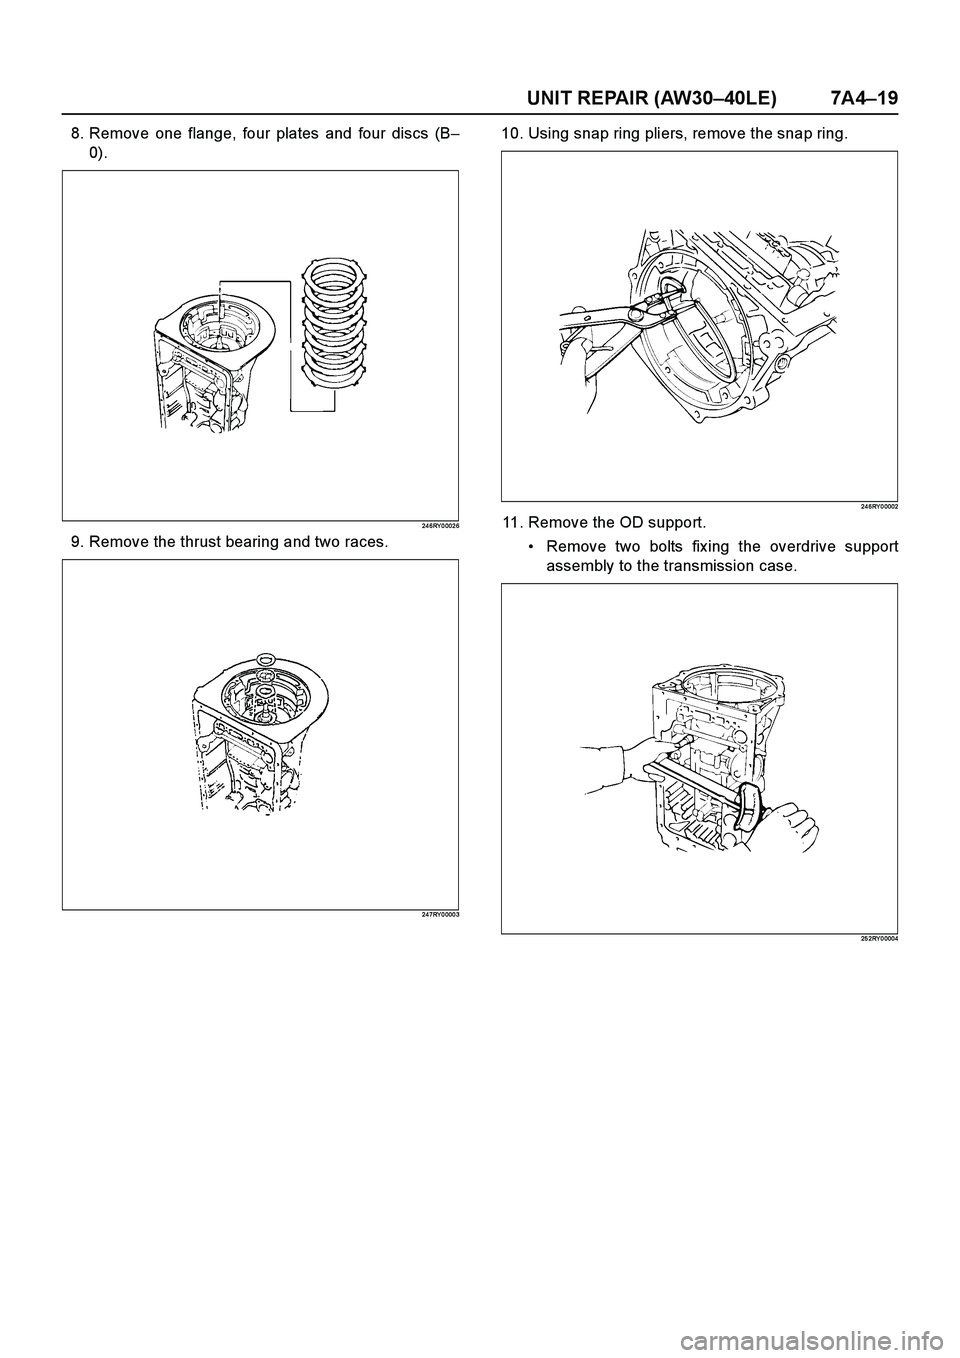 ISUZU TF SERIES 2004  Workshop Manual UNIT REPAIR (AW30–40LE) 7A4–19
8. Remove one flange, four plates and four discs (B–
0).
24 6RY 0 002 6
9. Remove the thrust bearing and two races.
24 7RY 0 000 3
10. Using snap ring pliers, remo